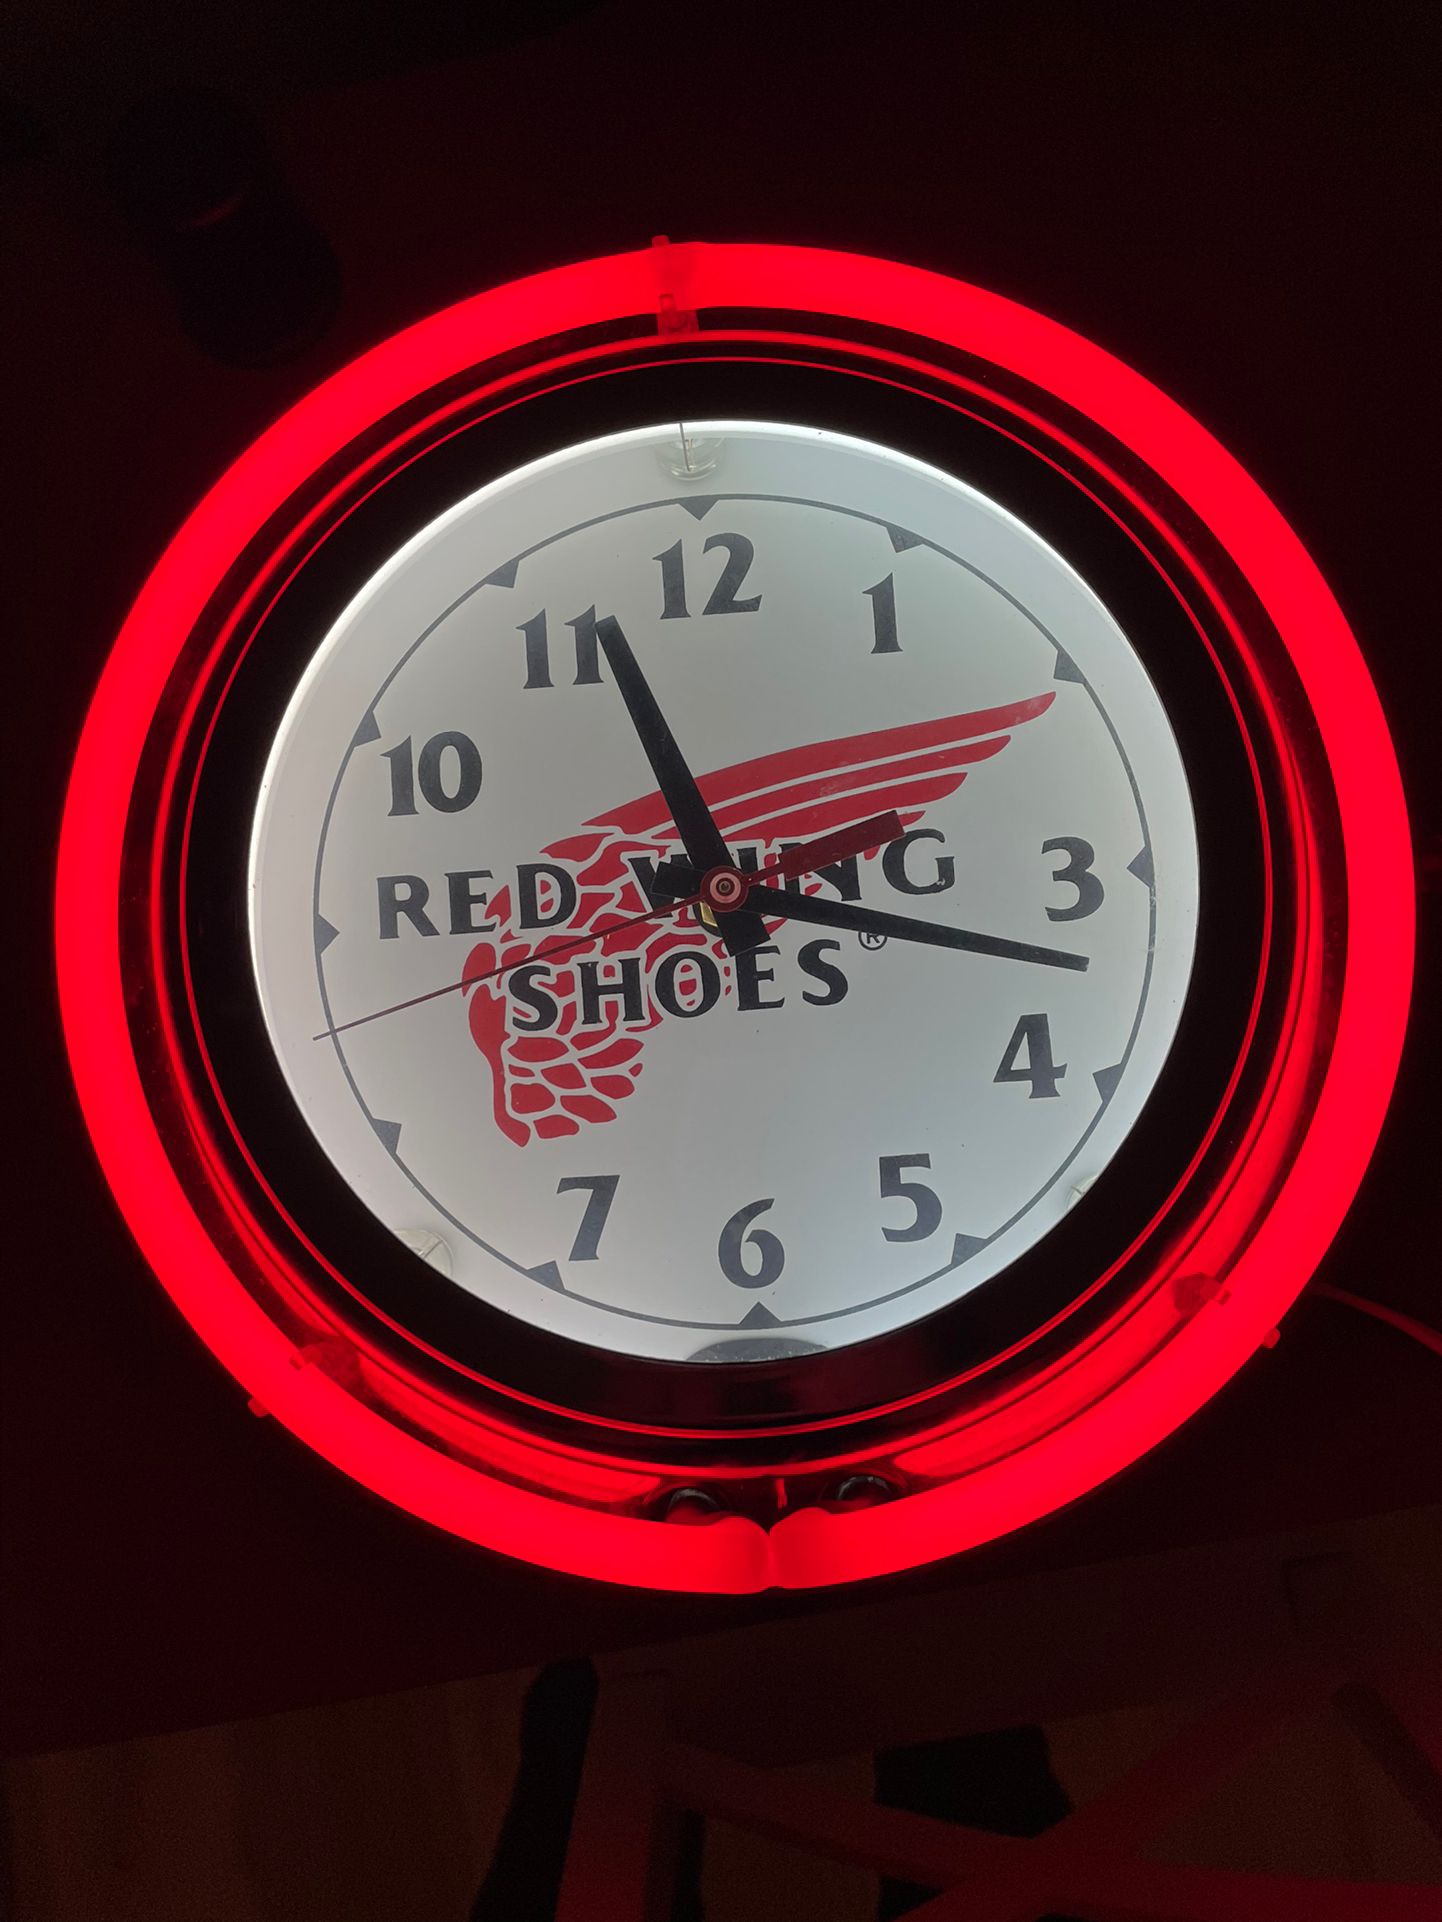 Detroit Red Wings Retro Lighted Wall Clock